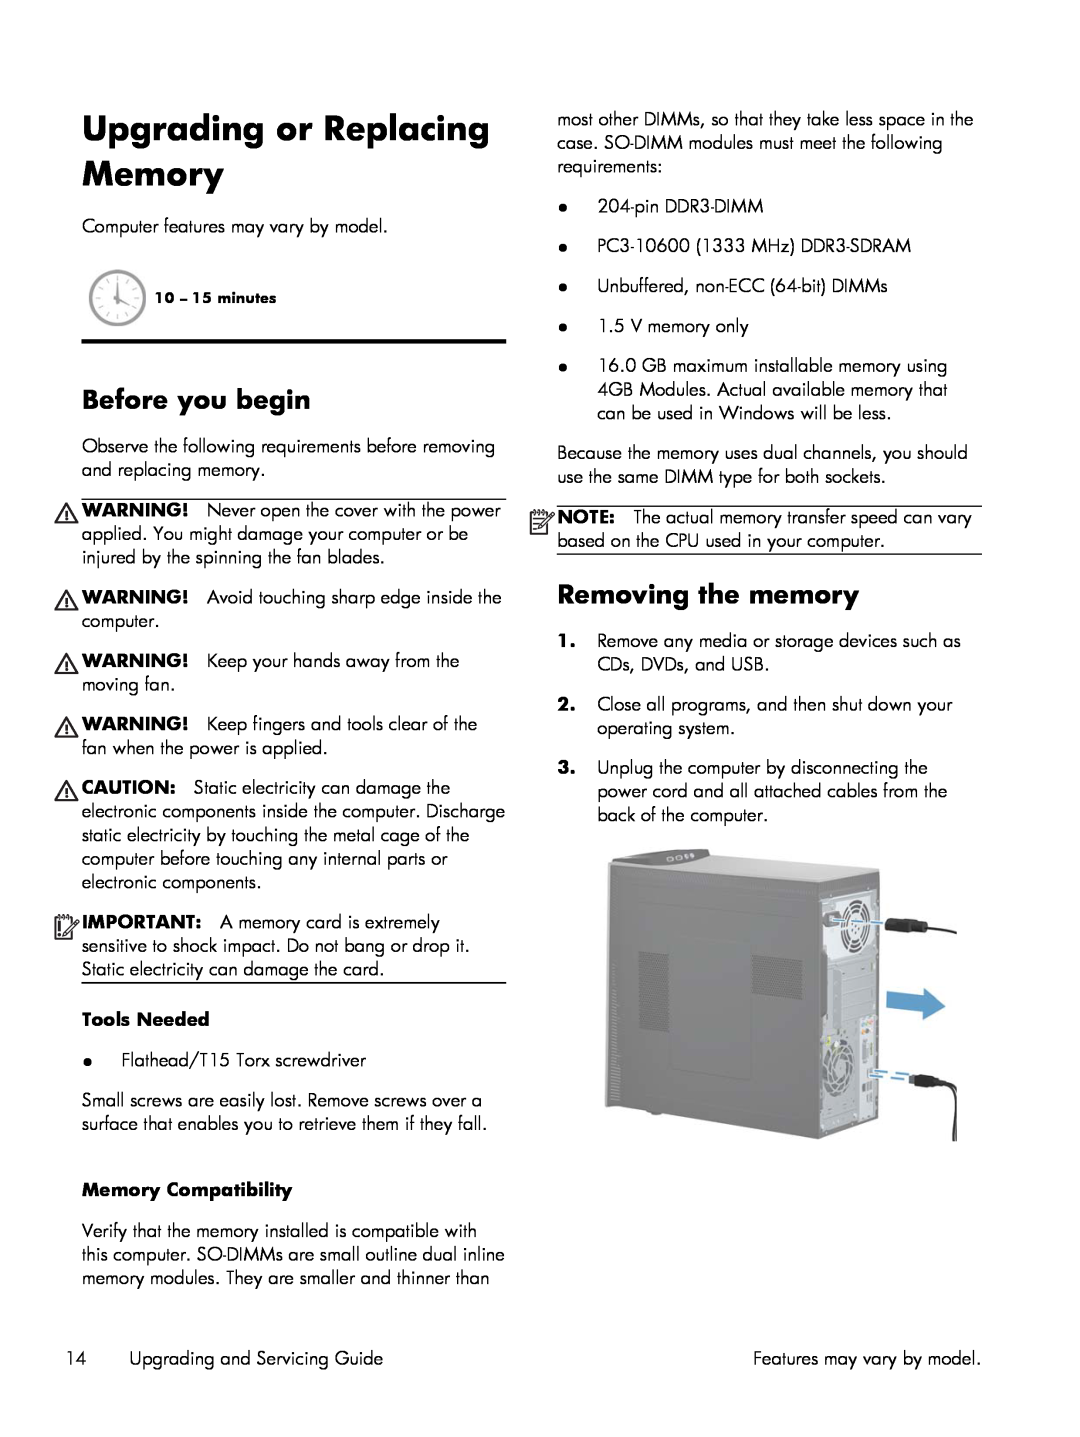 HP h8-1440t manual Upgrading or Replacing Memory, Removing the memory, Memory Compatibility, Before you begin, Tools Needed 